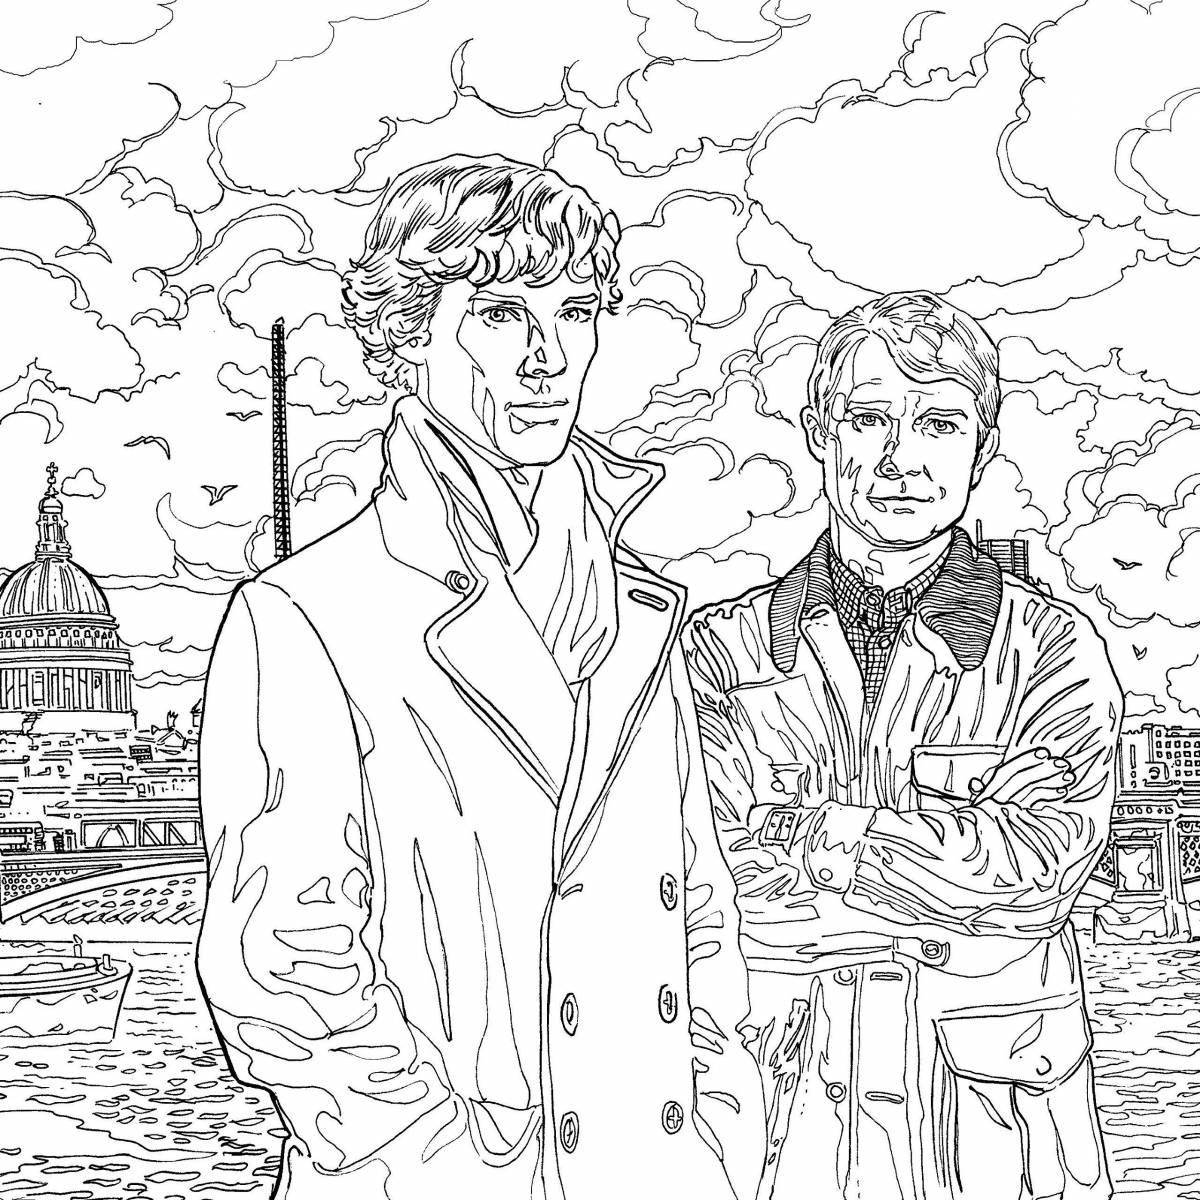 Charming supernatural academy coloring page